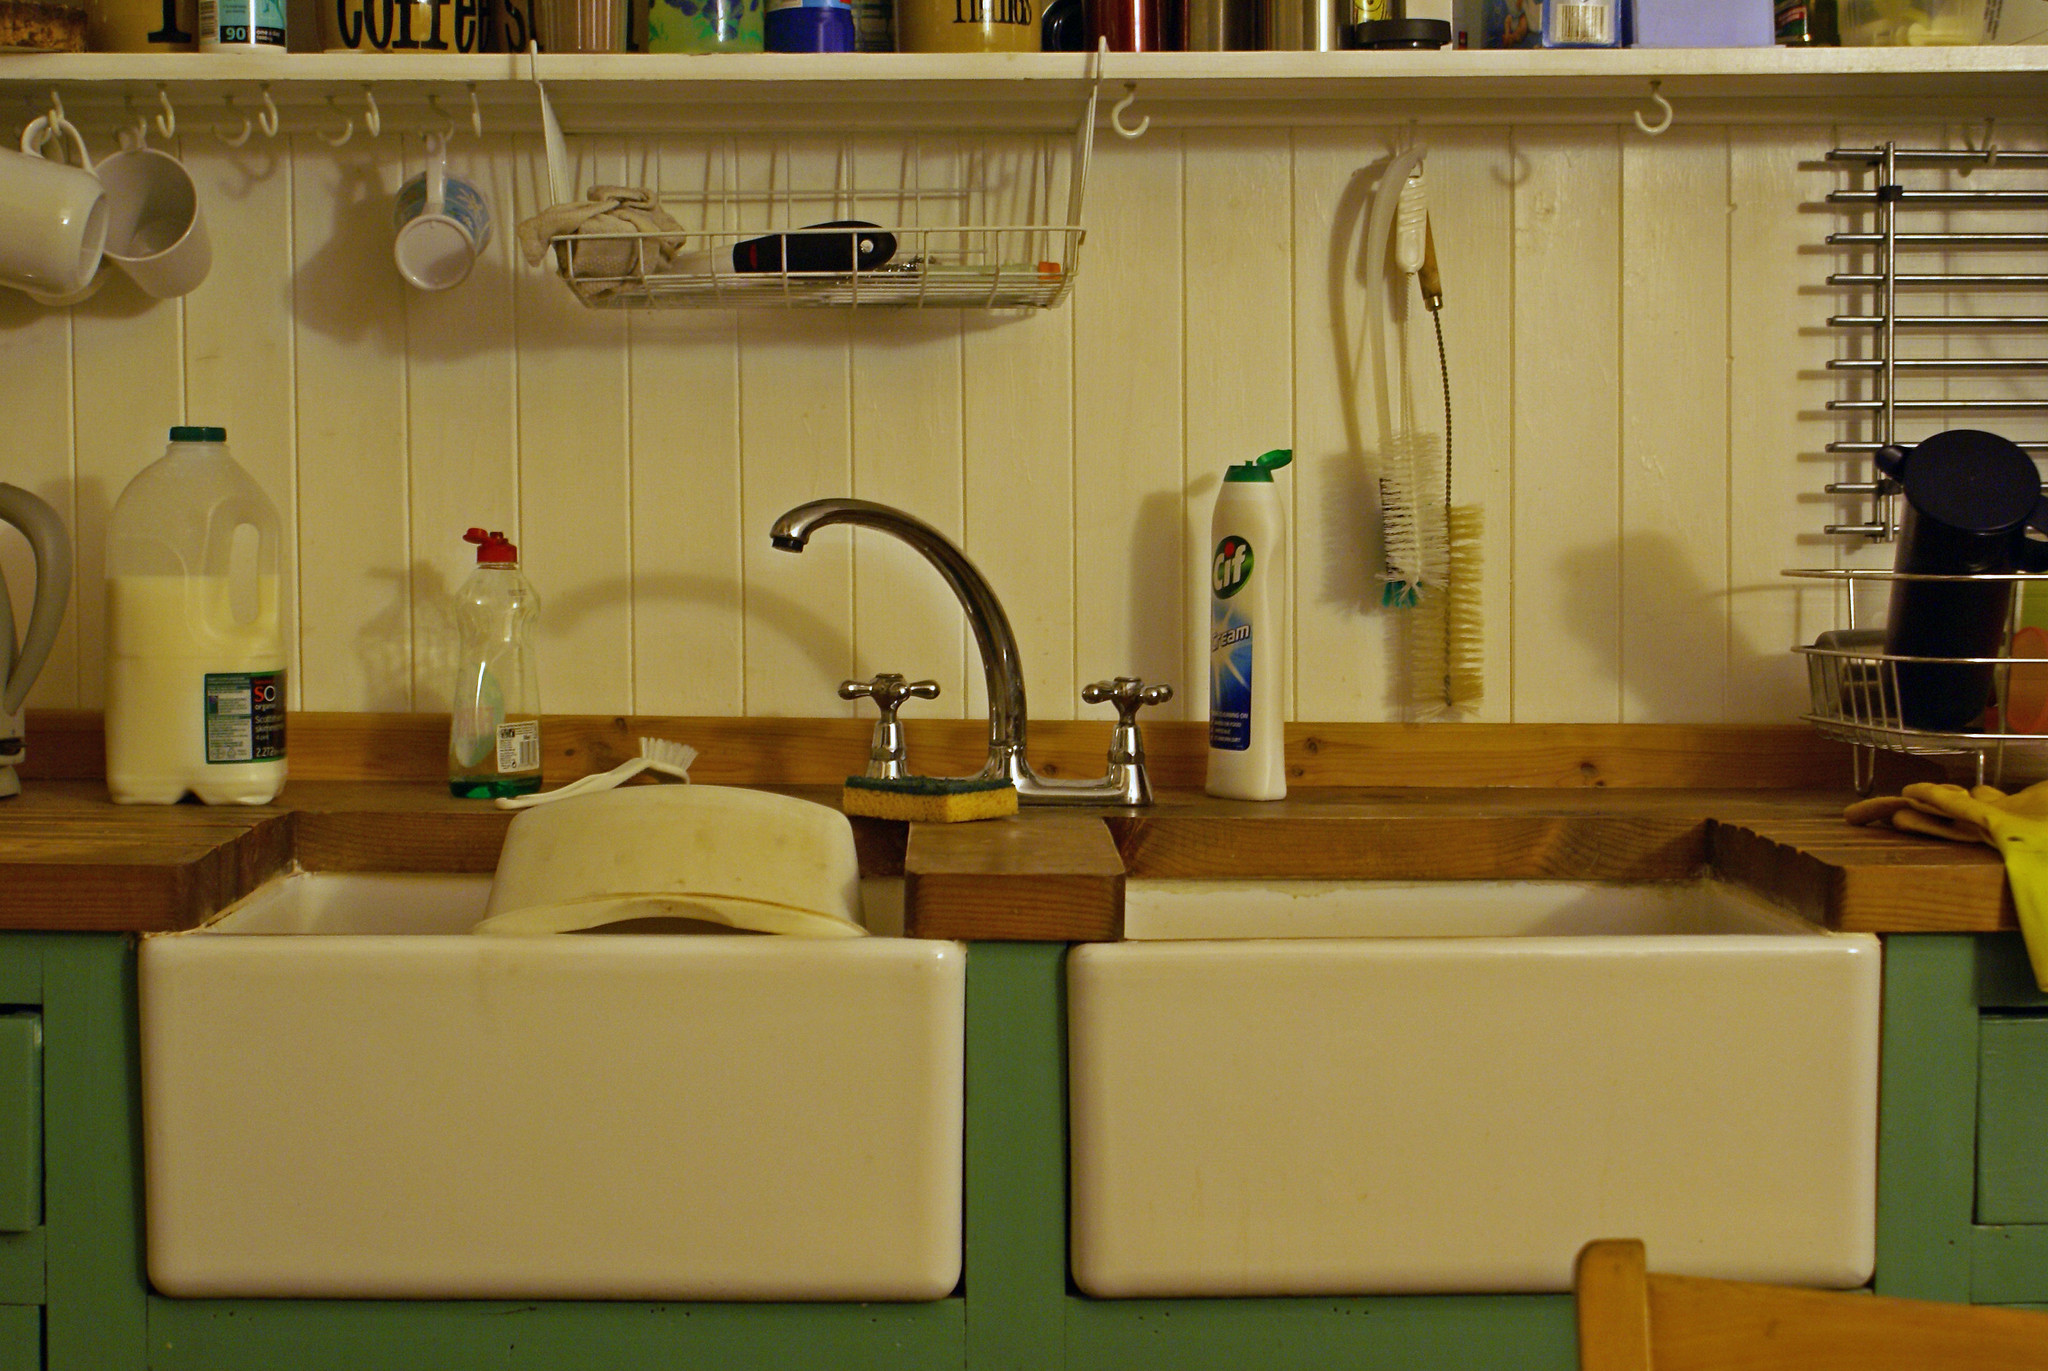 Image of a kitchen sink.